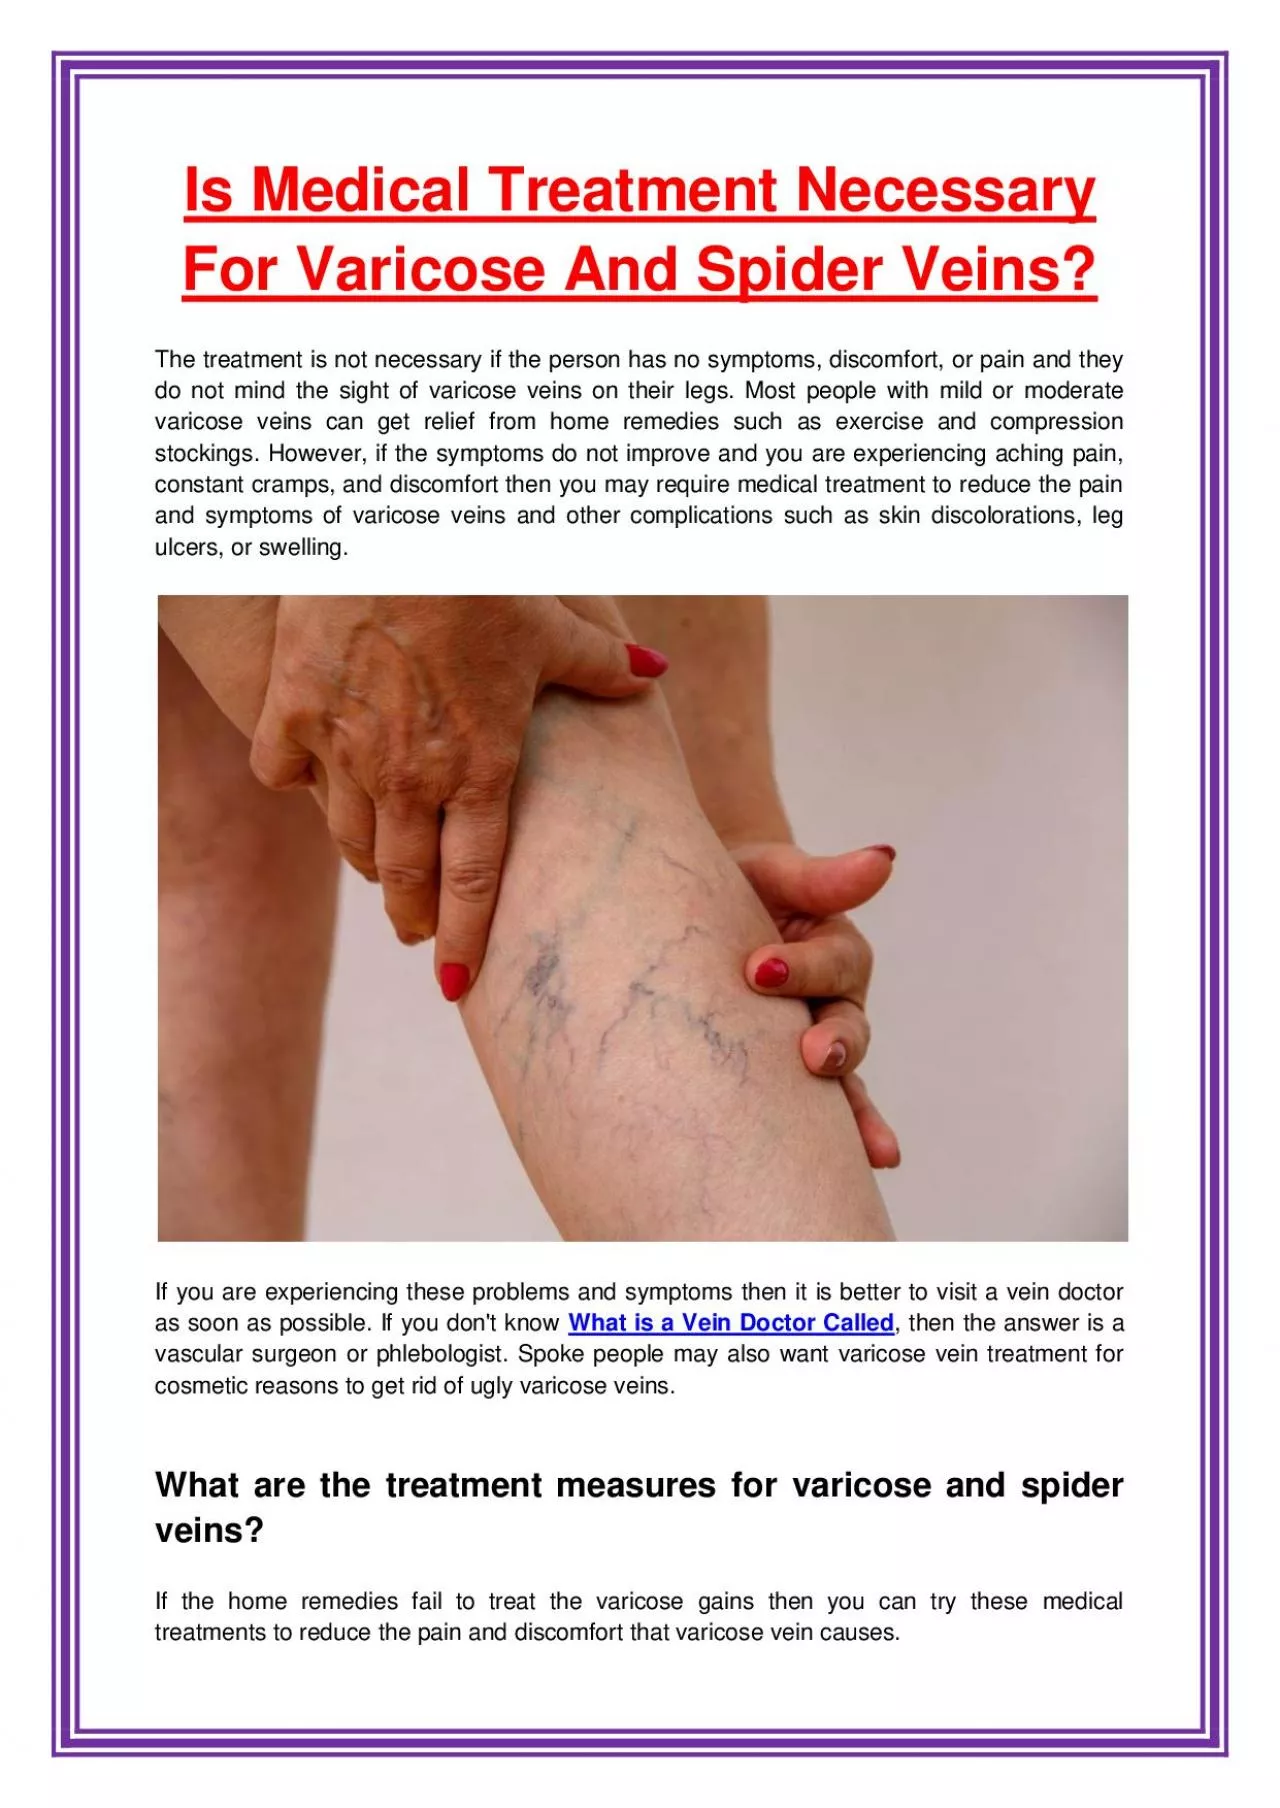 Is Medical Treatment Necessary For Varicose And Spider Veins?